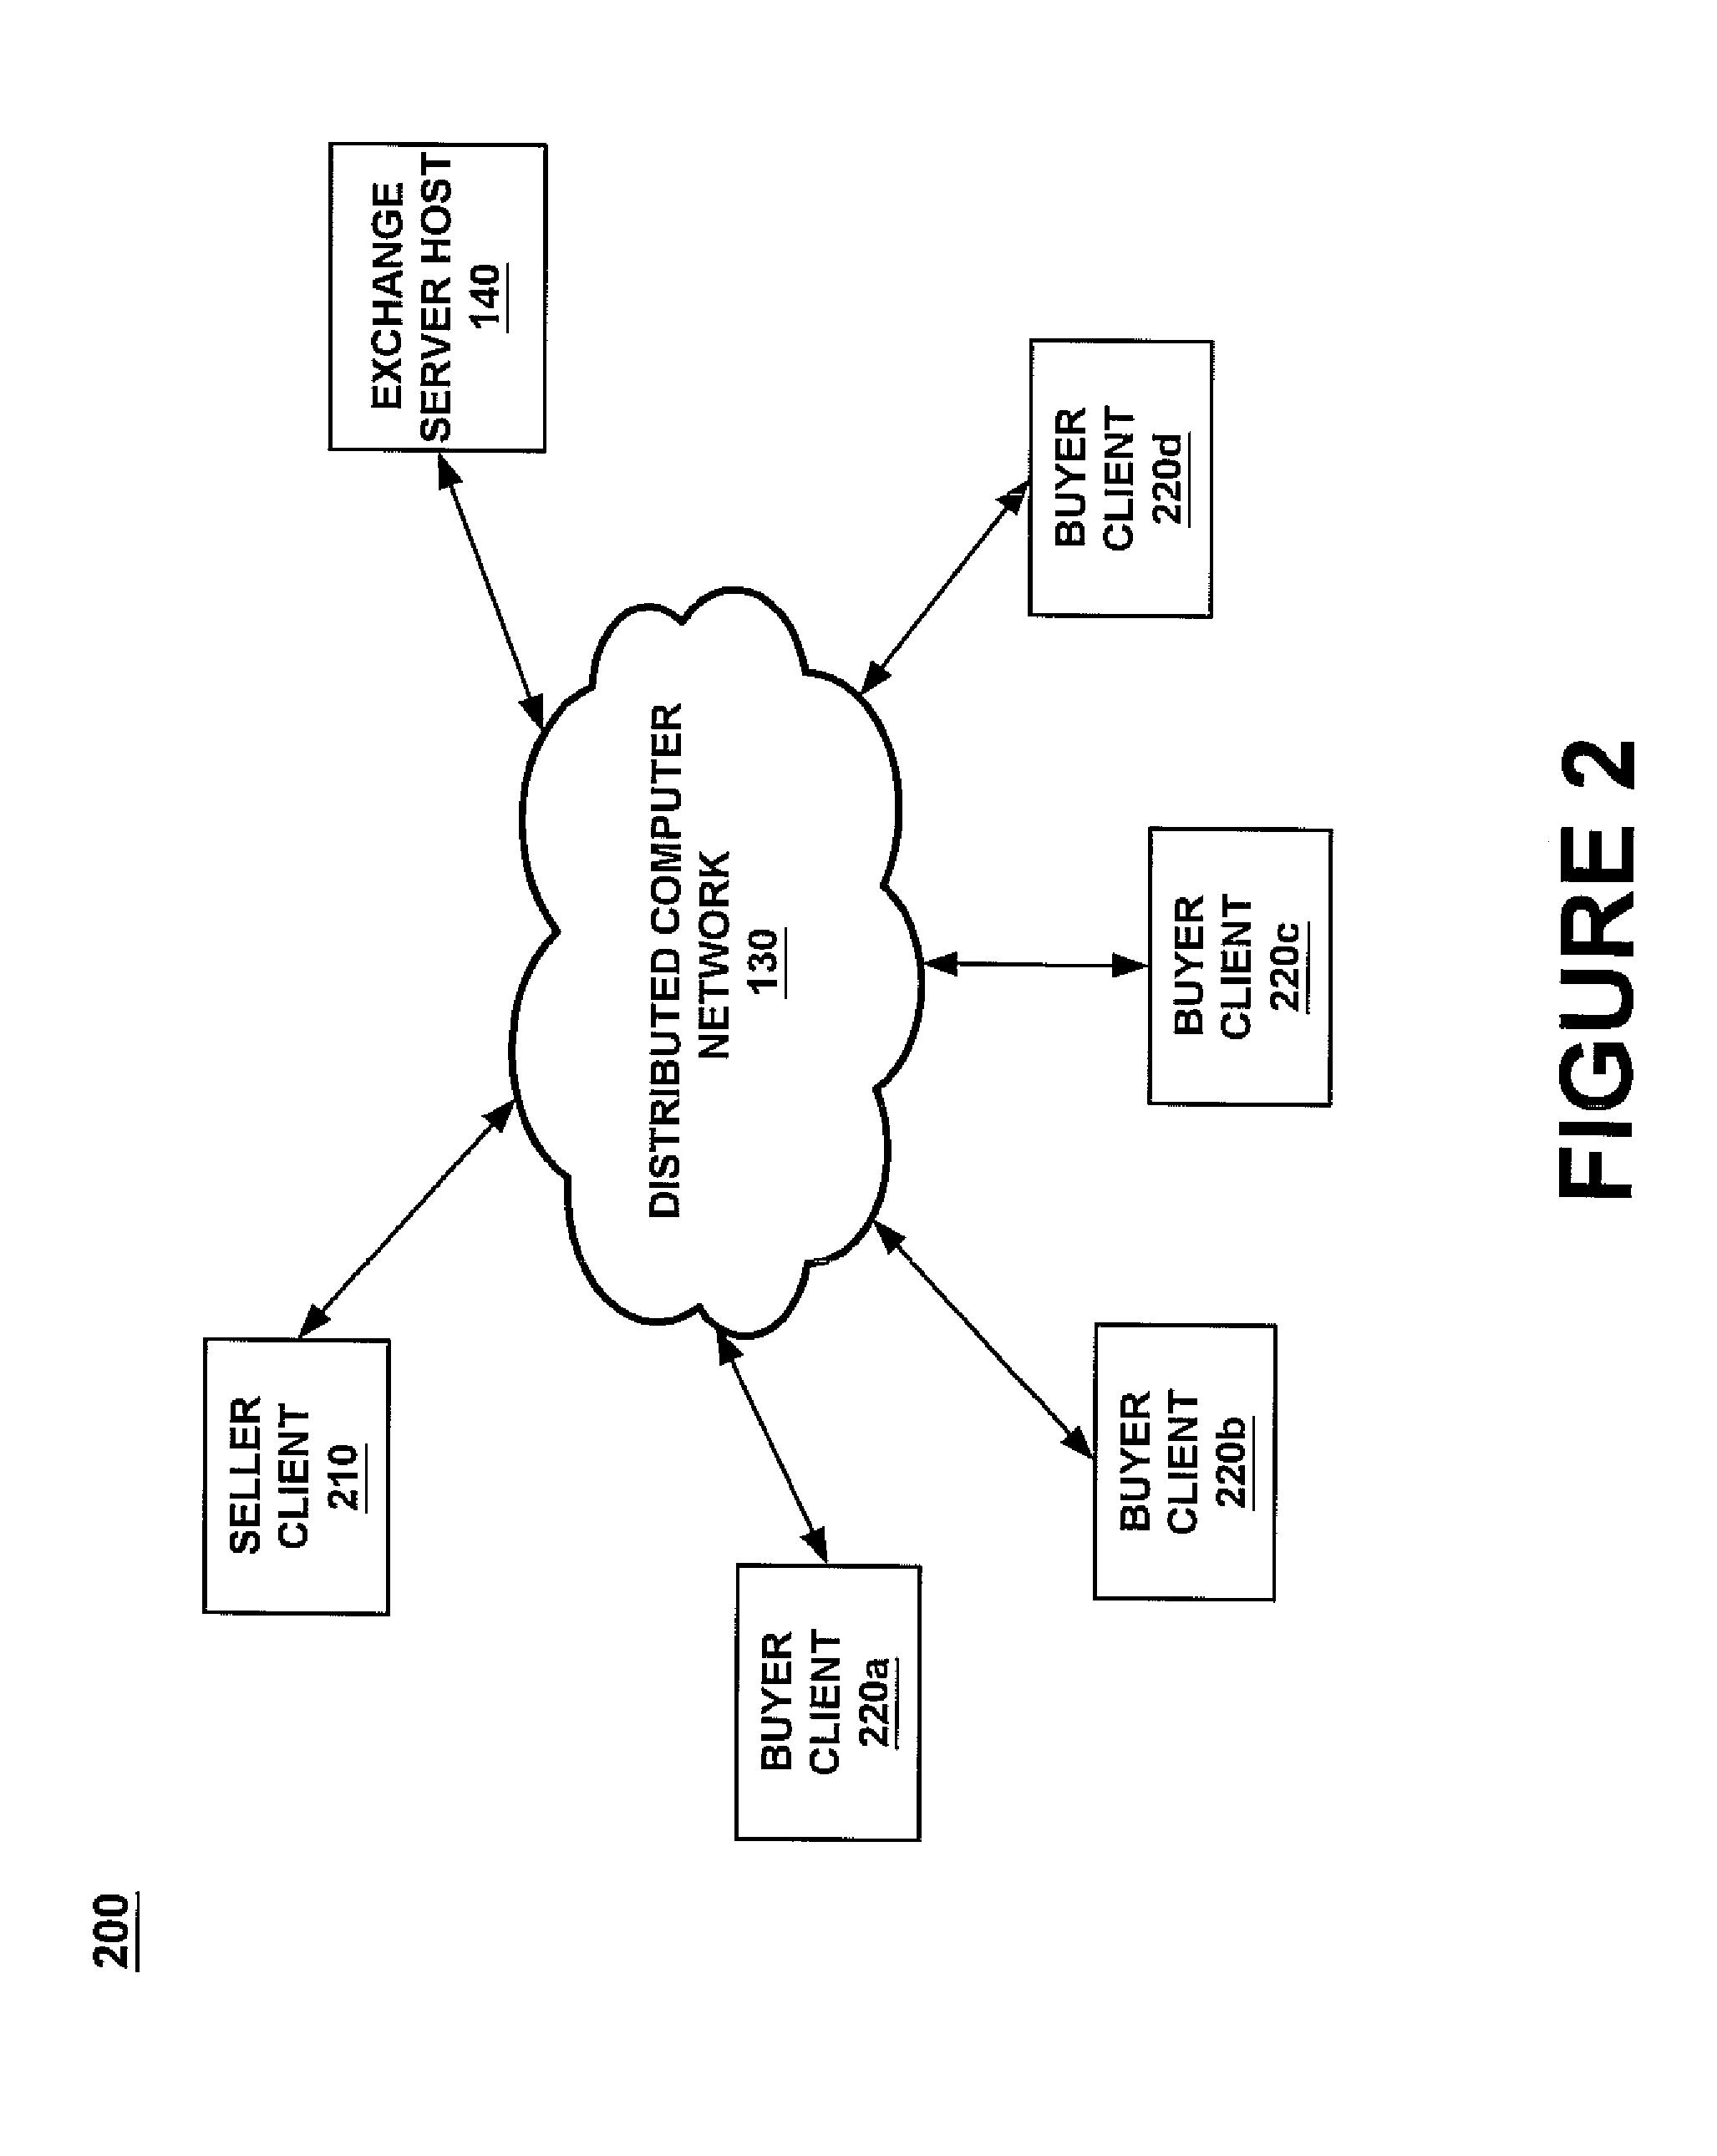 Method and system for implementing attribute-based bidding and bid comparison in an electronic exchange